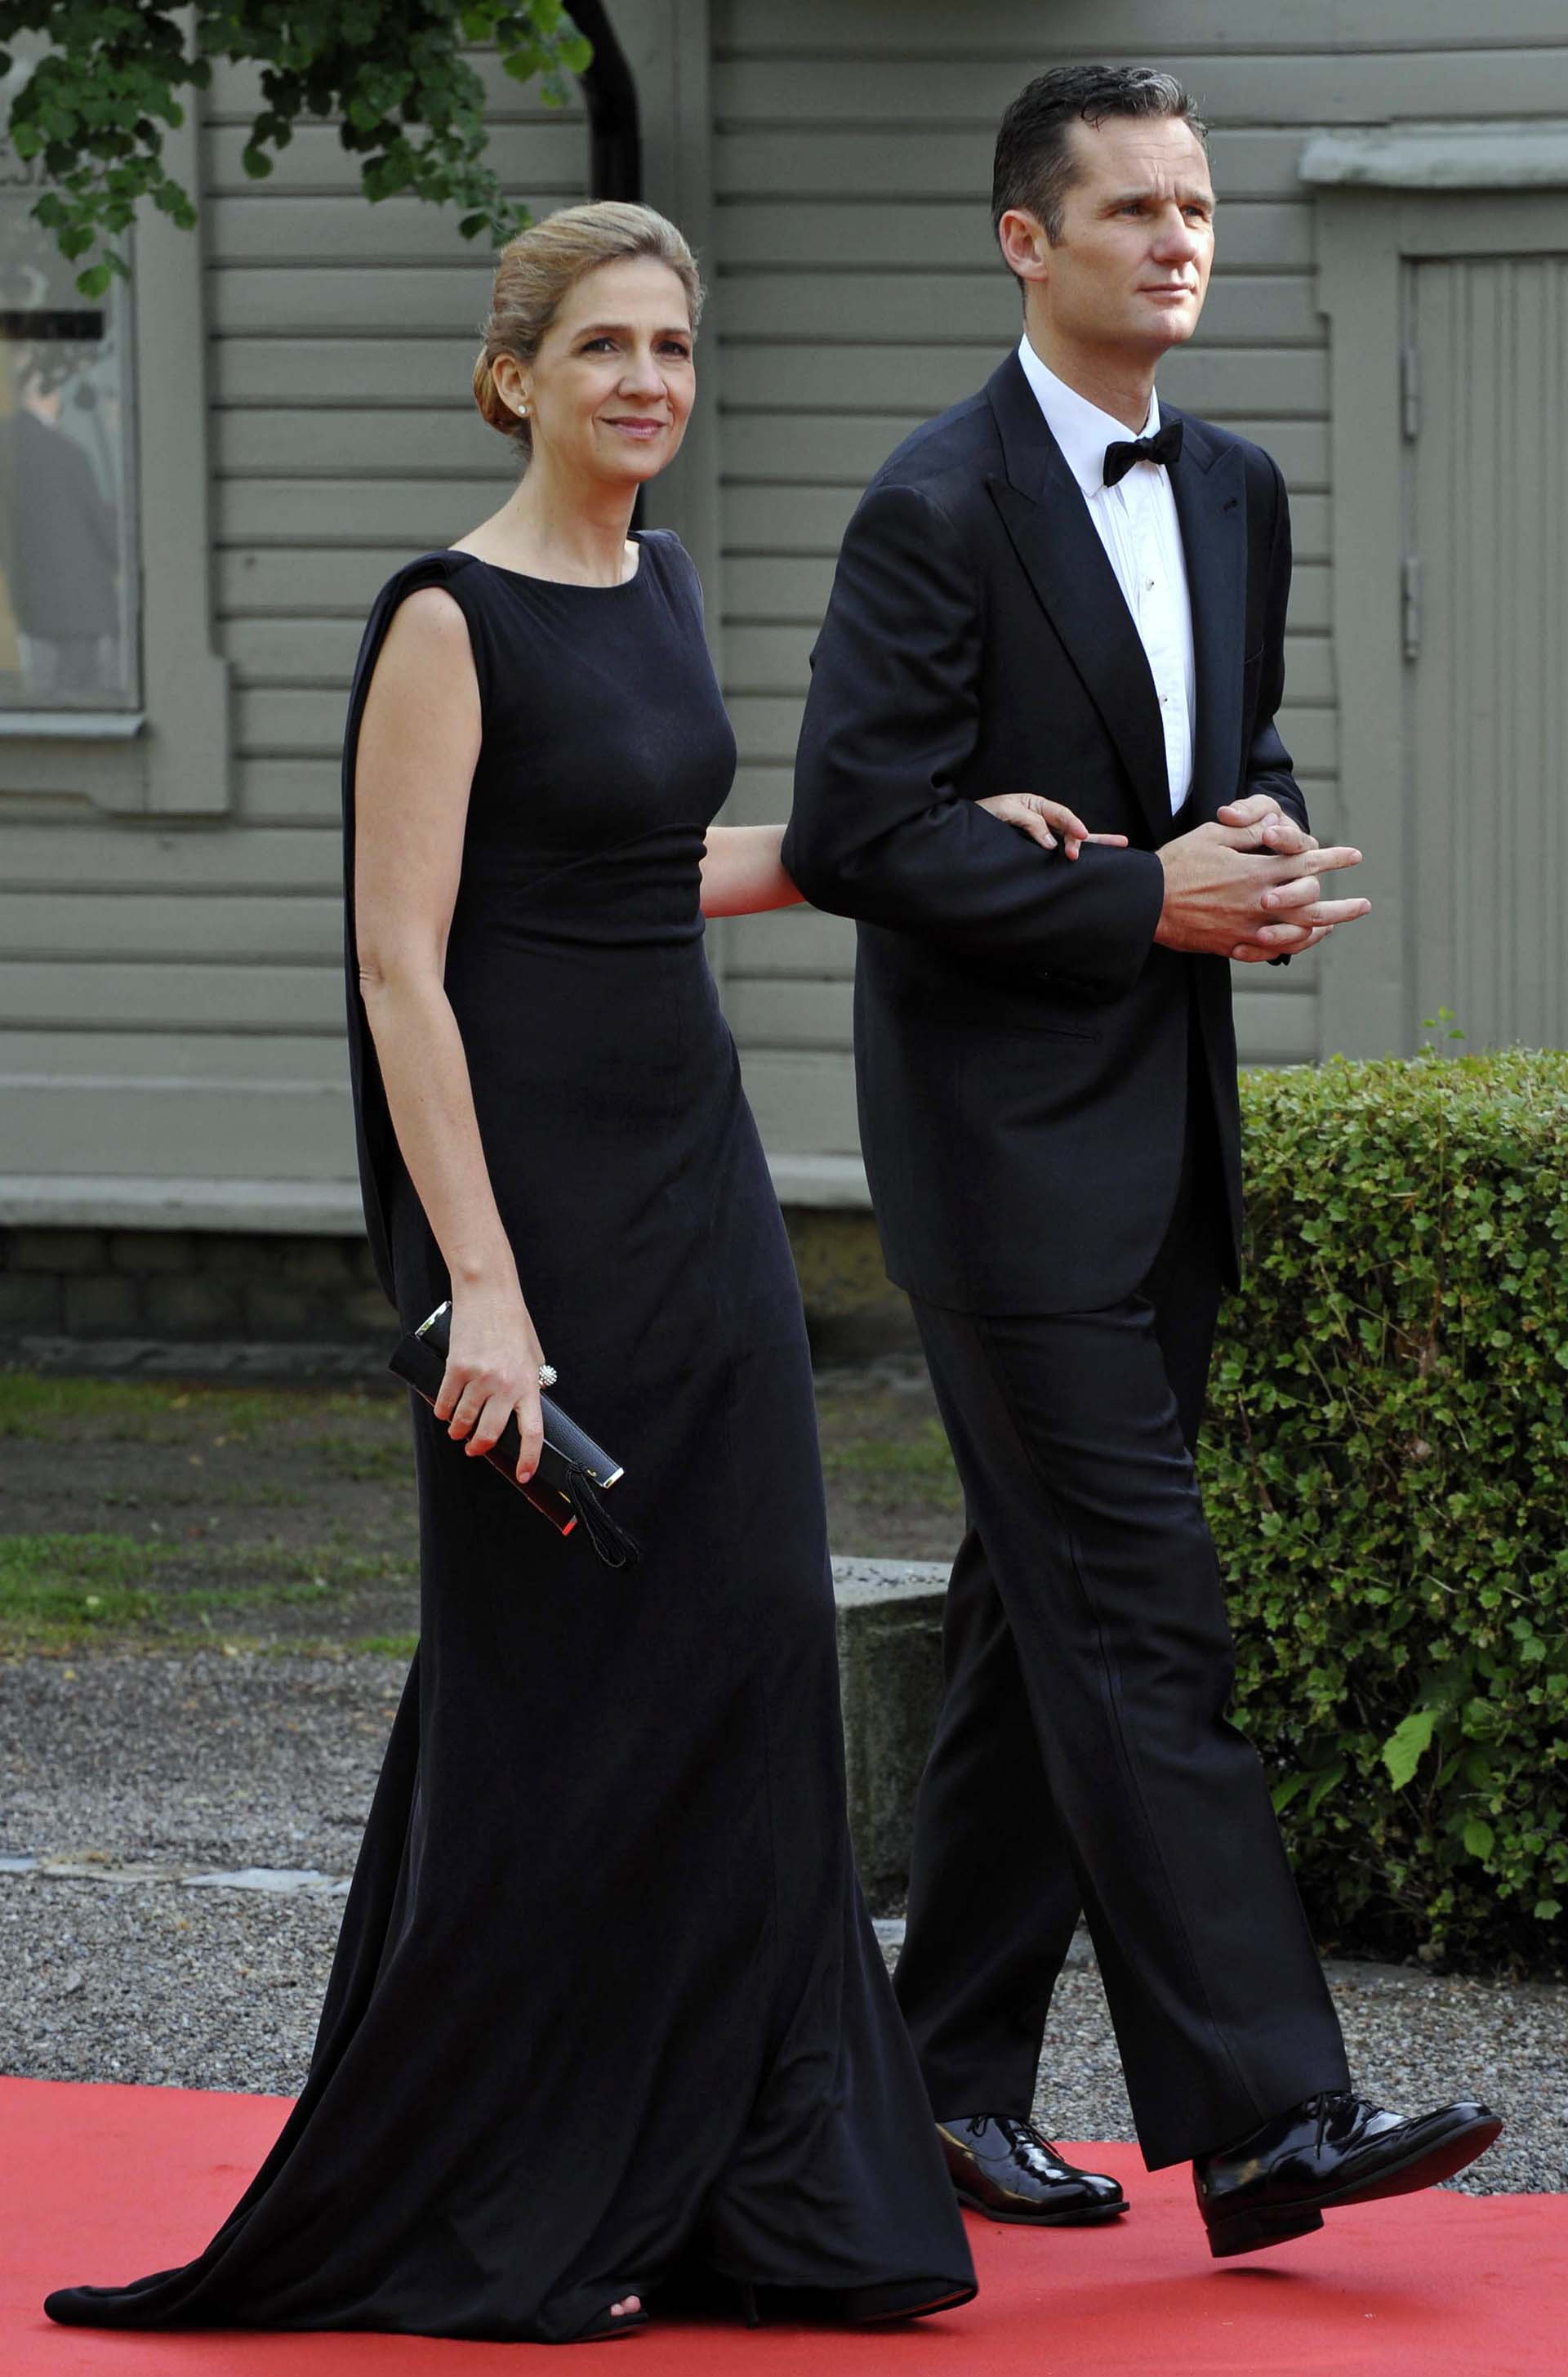 Infanta Christina of Spain, left and husband Iñaki Urdangarin arriving at the Swedish Government's dinner, at the Eric Ericson Hall in Stockholm, Sweden, Friday, June 18, 2010